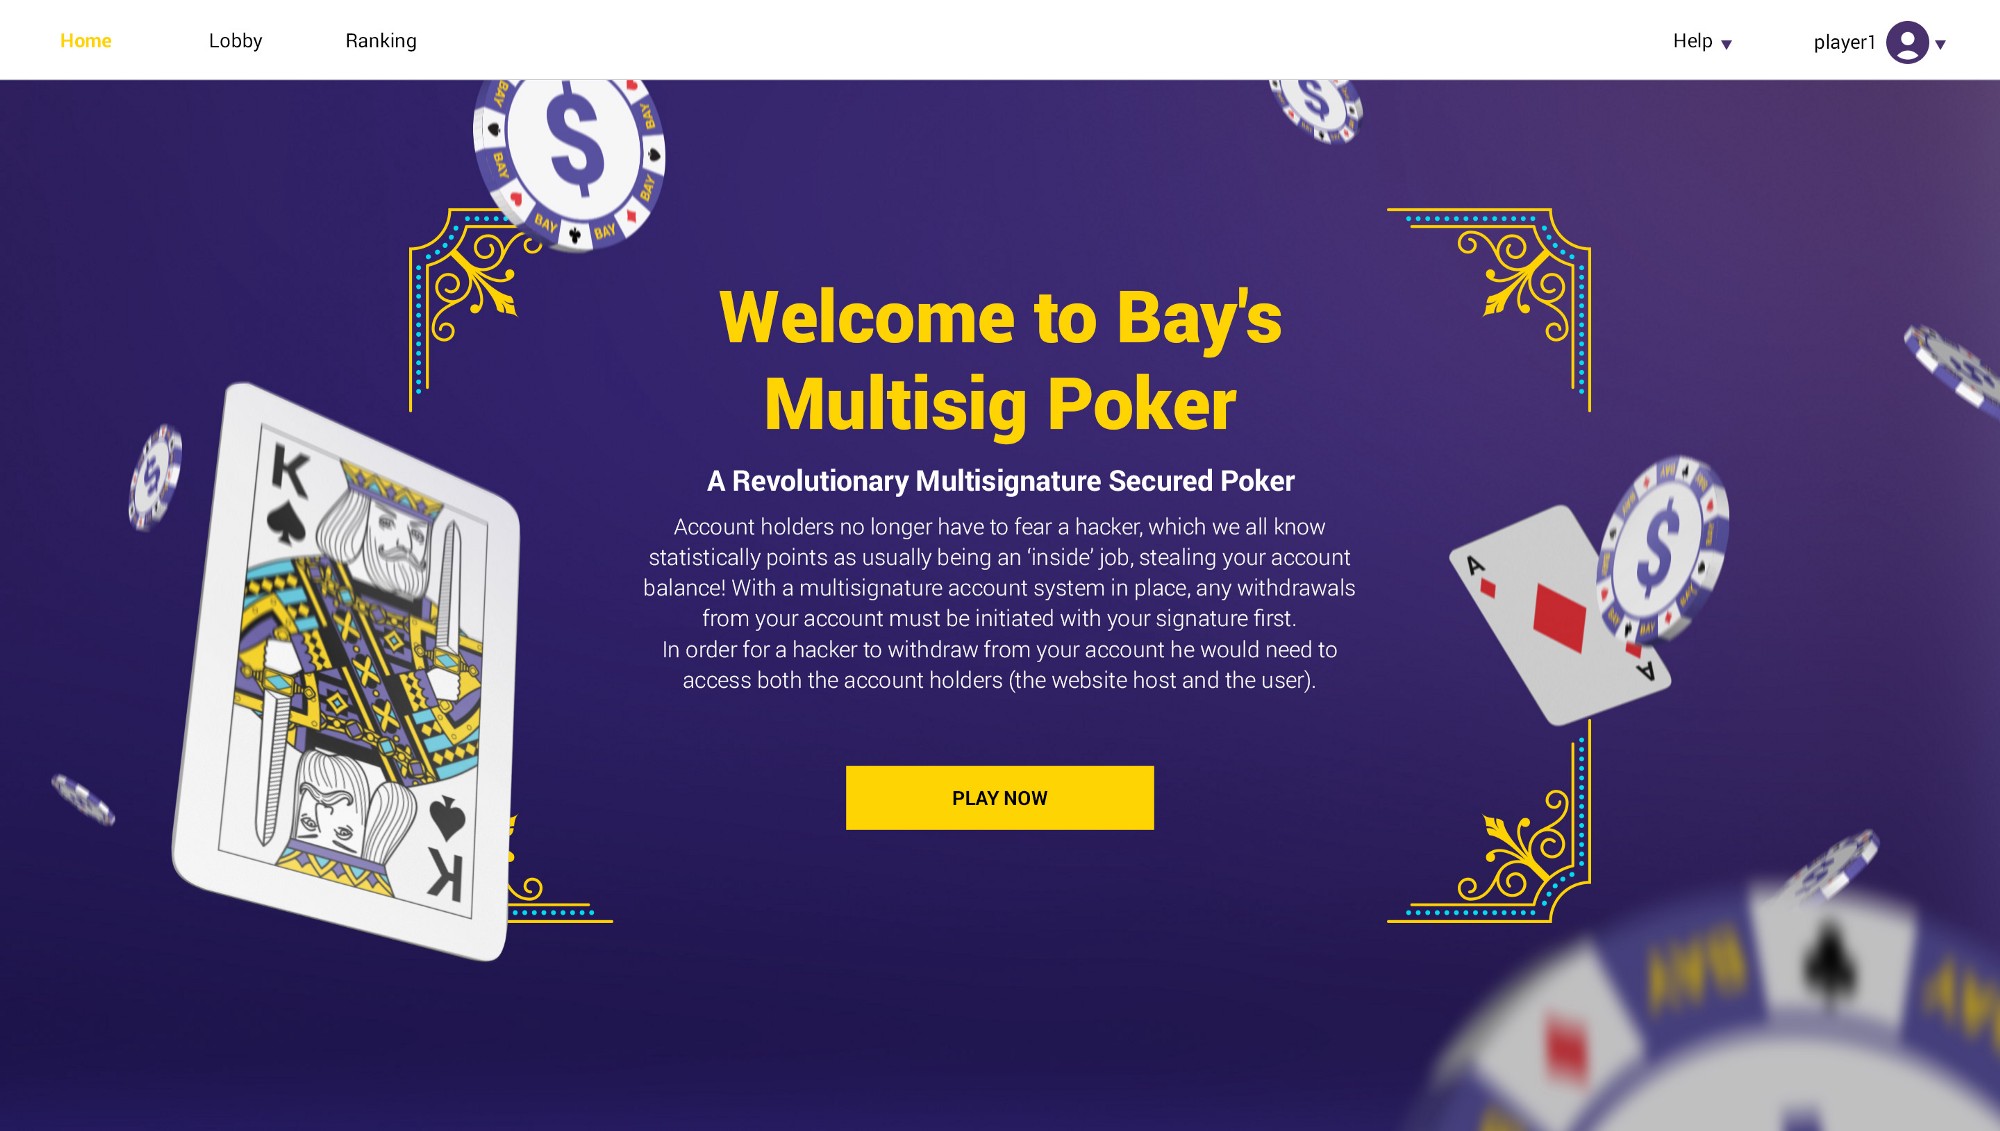 The first multisignature based poker website in the industry